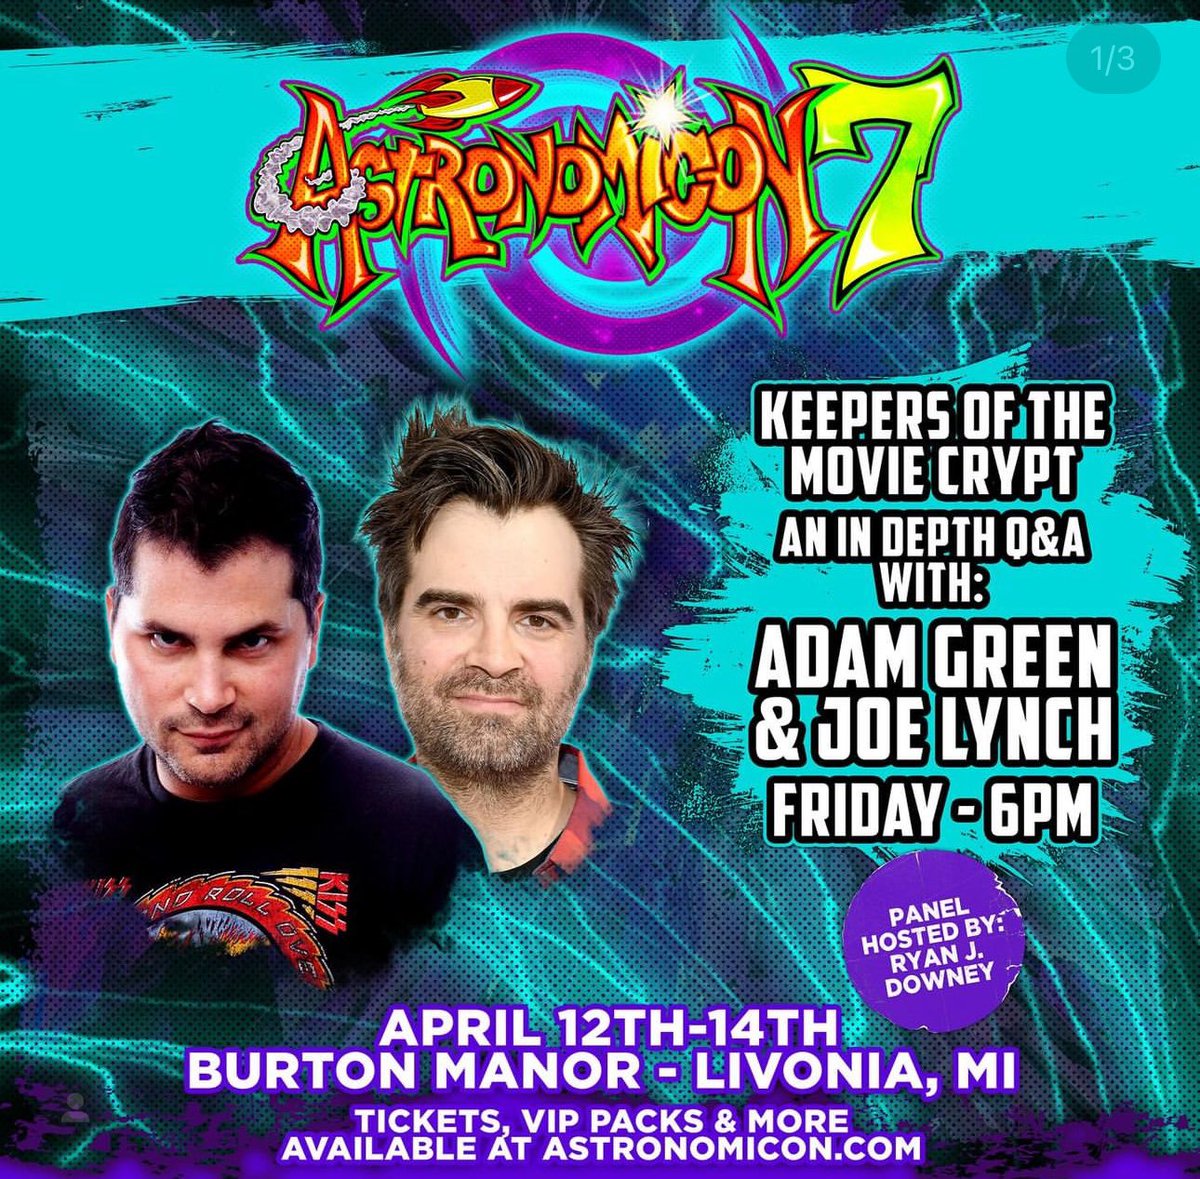 Today at 6pm!
@Adam_Fn_Green and I hit the panel stage at @AstronomiconMI to discuss movies, @MovieCrypt HOLLISTON and more…hosted by @ryandowney w/ photo ops at 8pm! 
See you there!